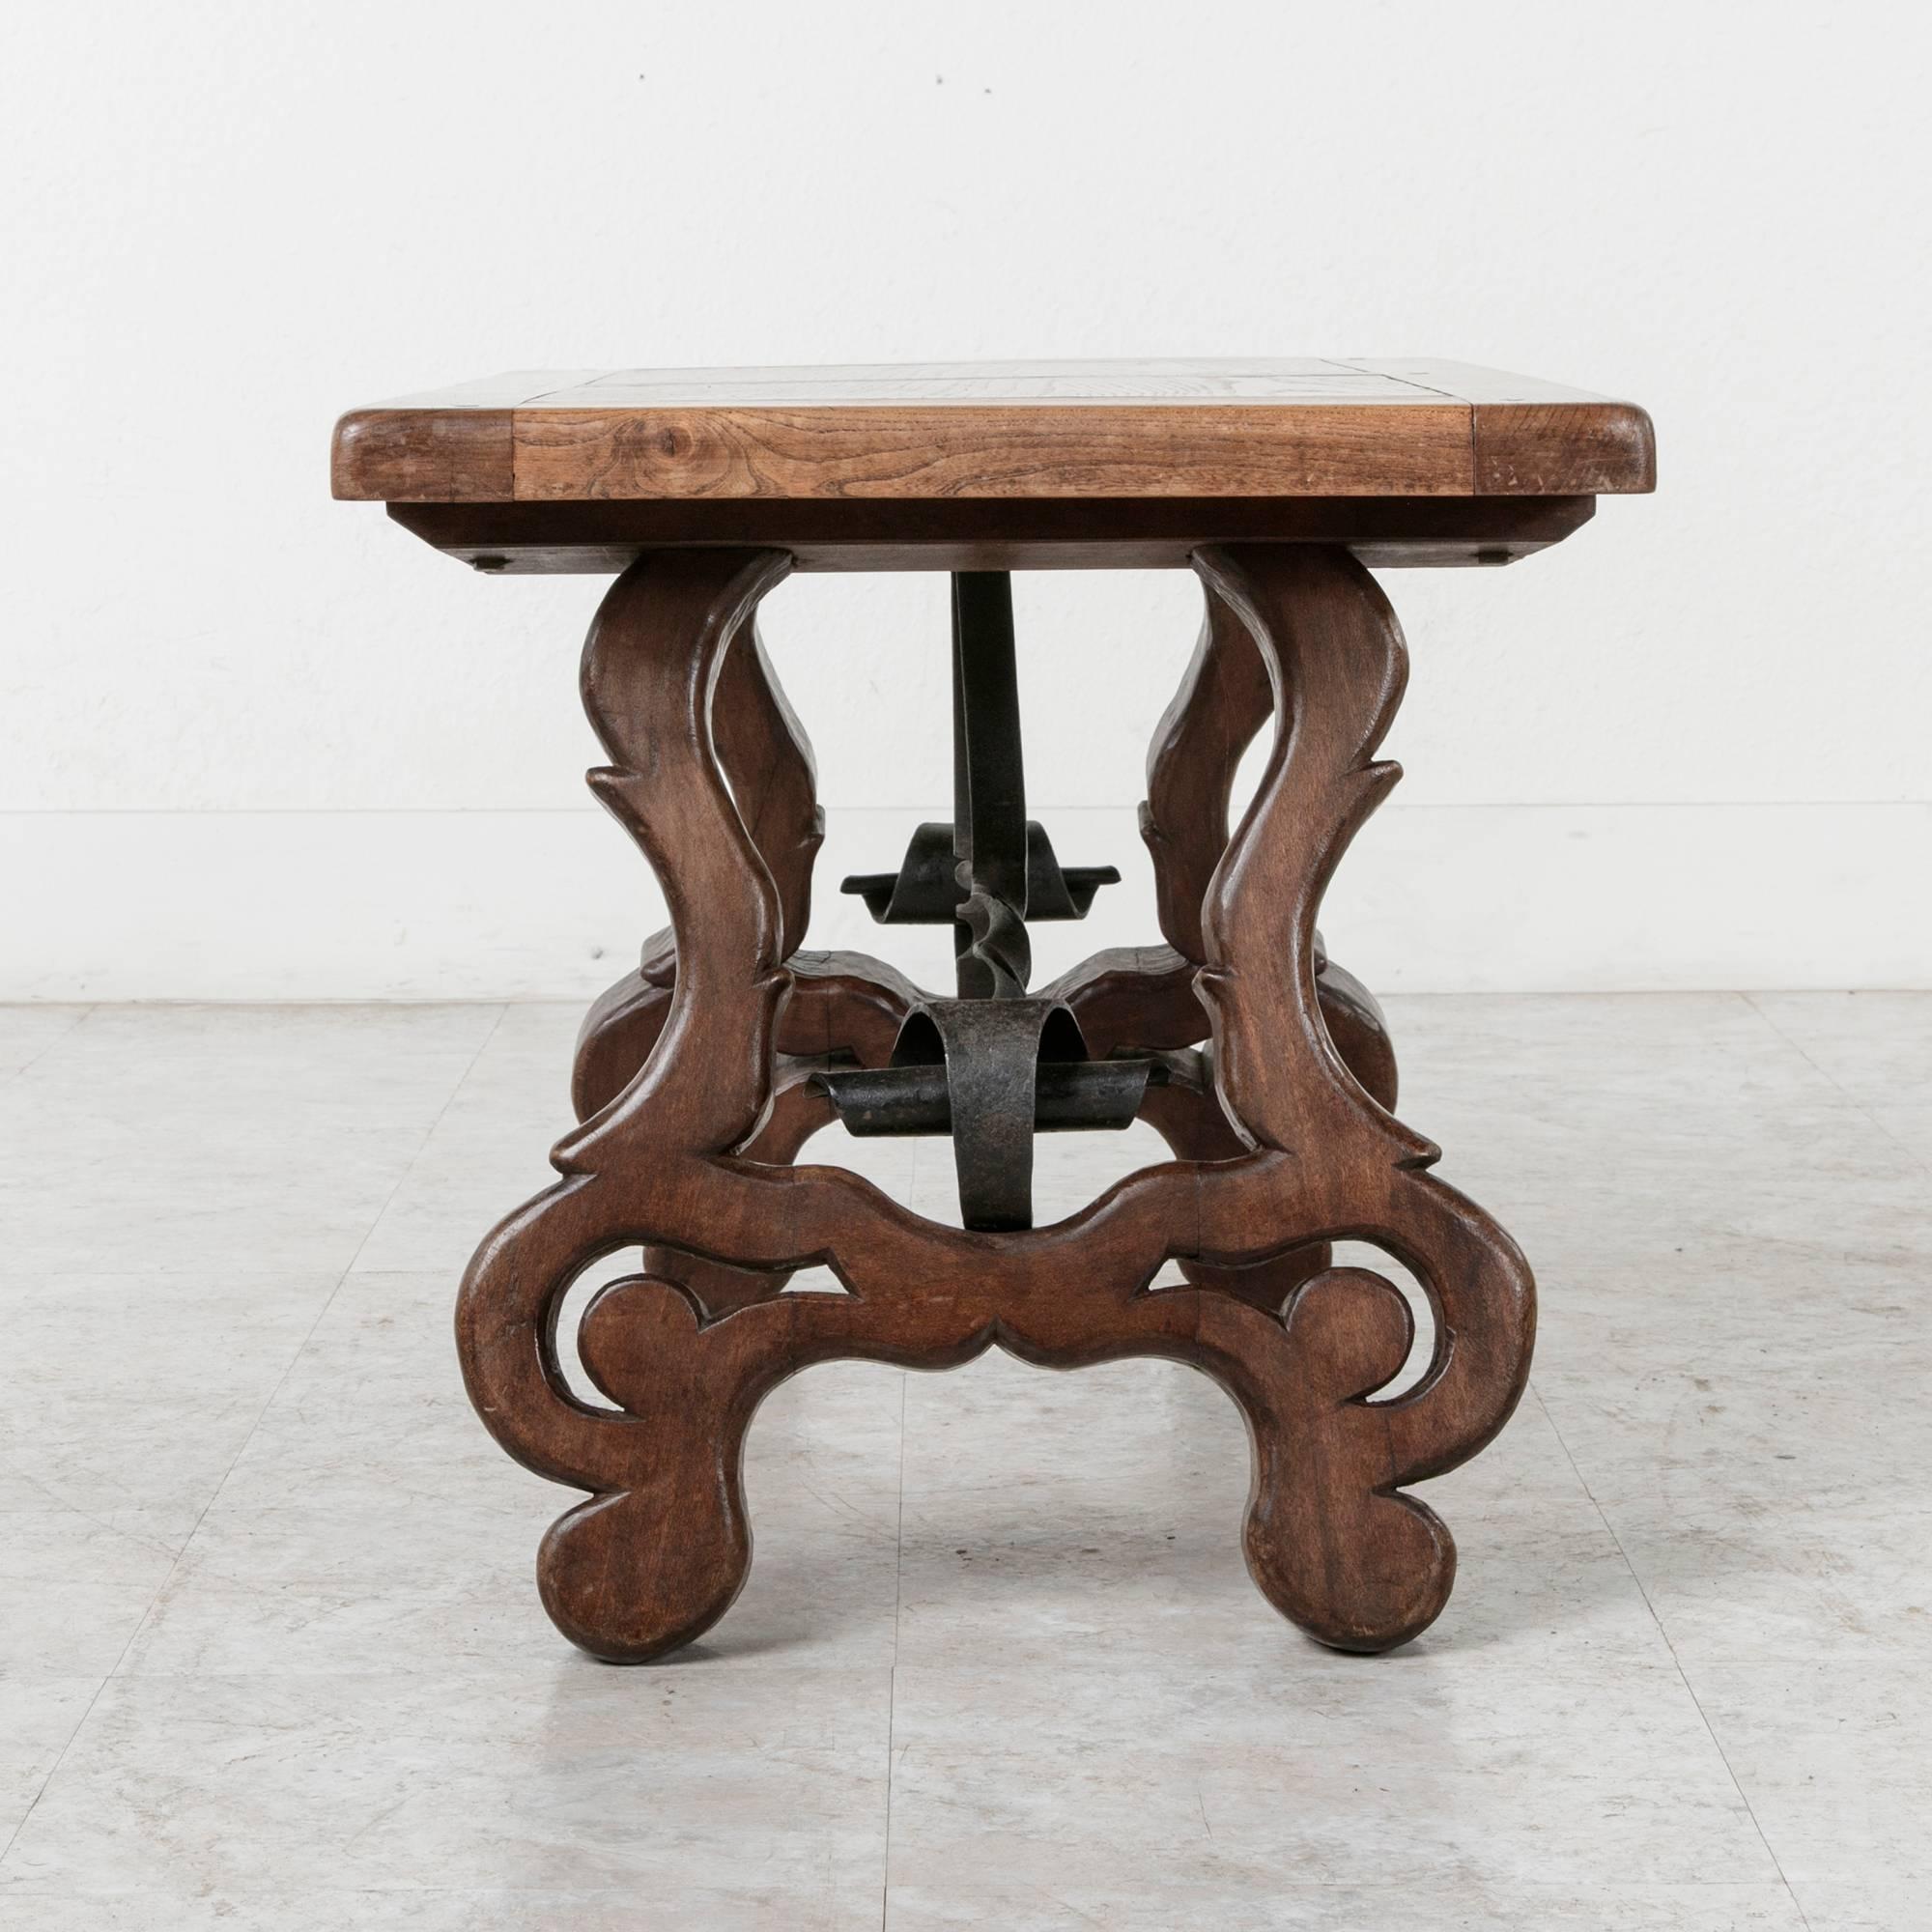 Mid-20th Century Early 20th Century Spanish Style Oak Coffee Table or Bench with Iron Stretcher